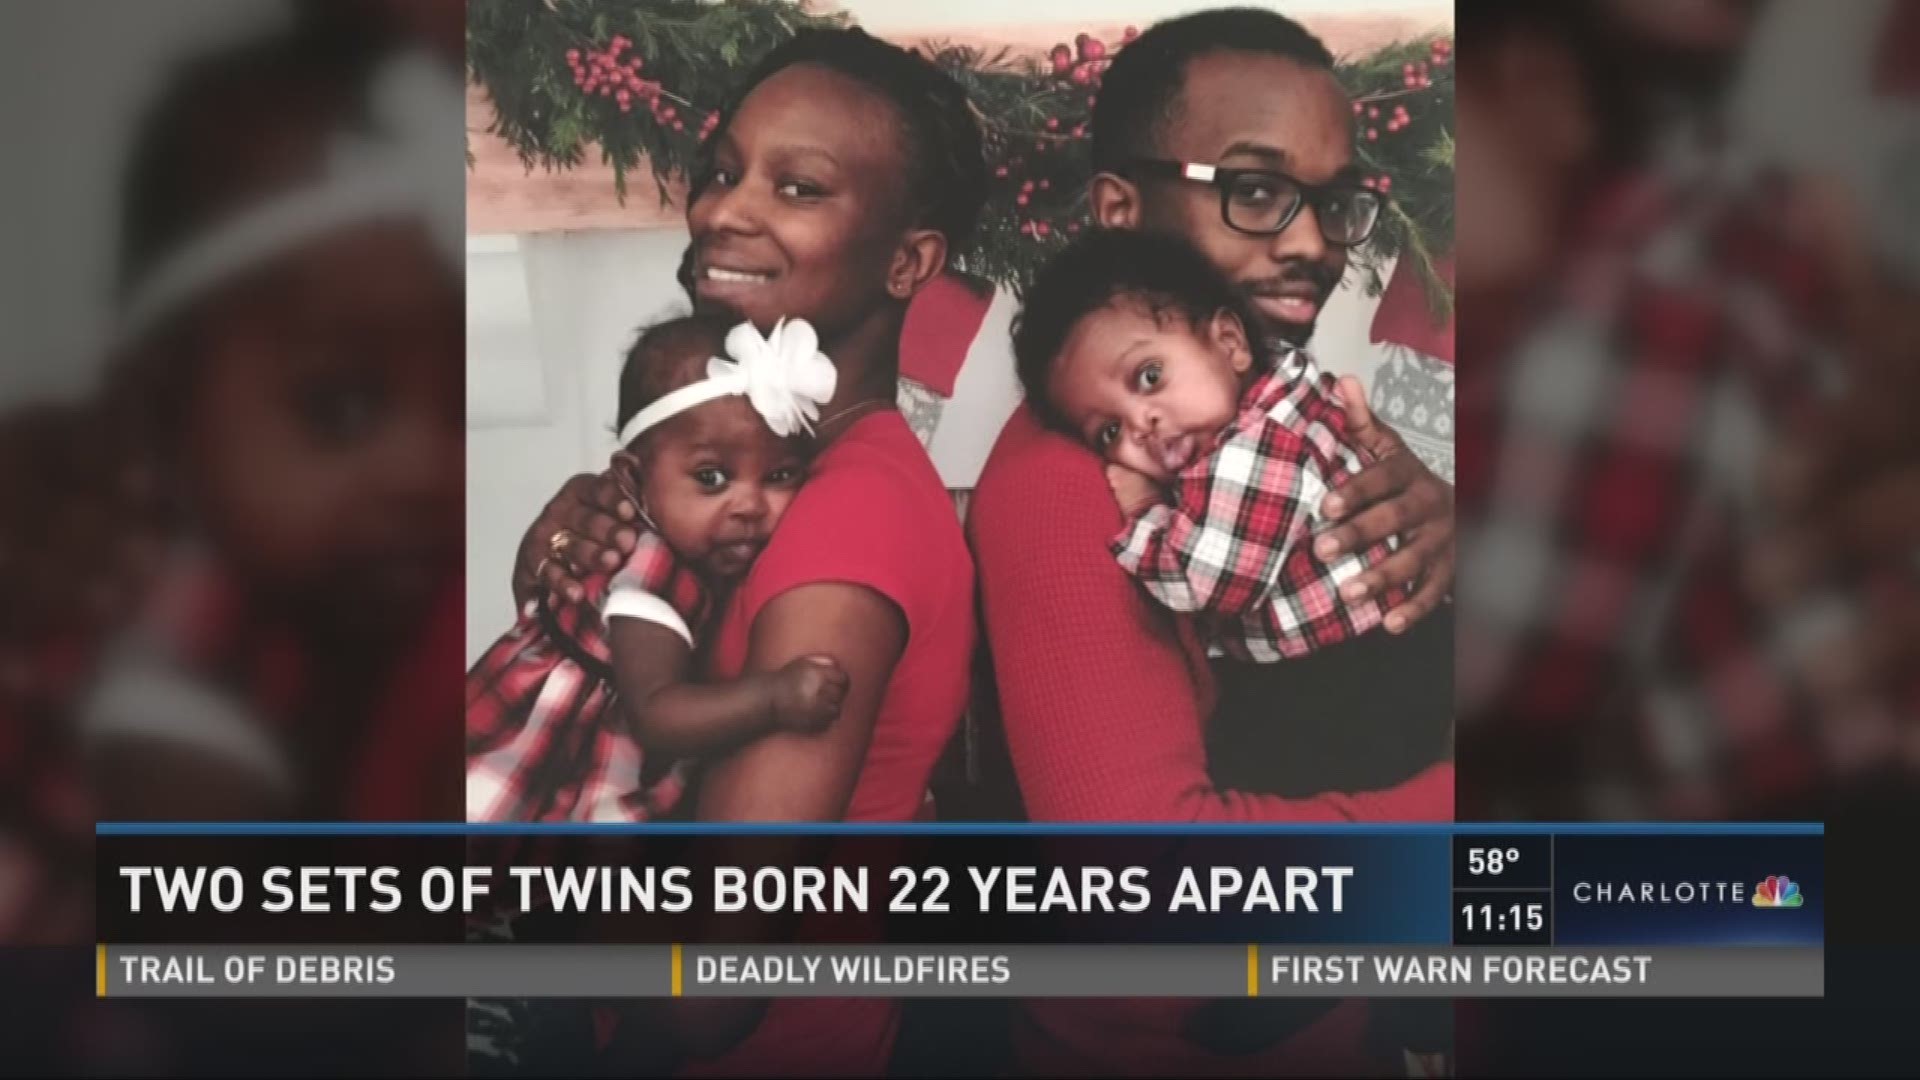 Two sets of twins born 22 years apart, but that isn't what makes this family's story so amazing.